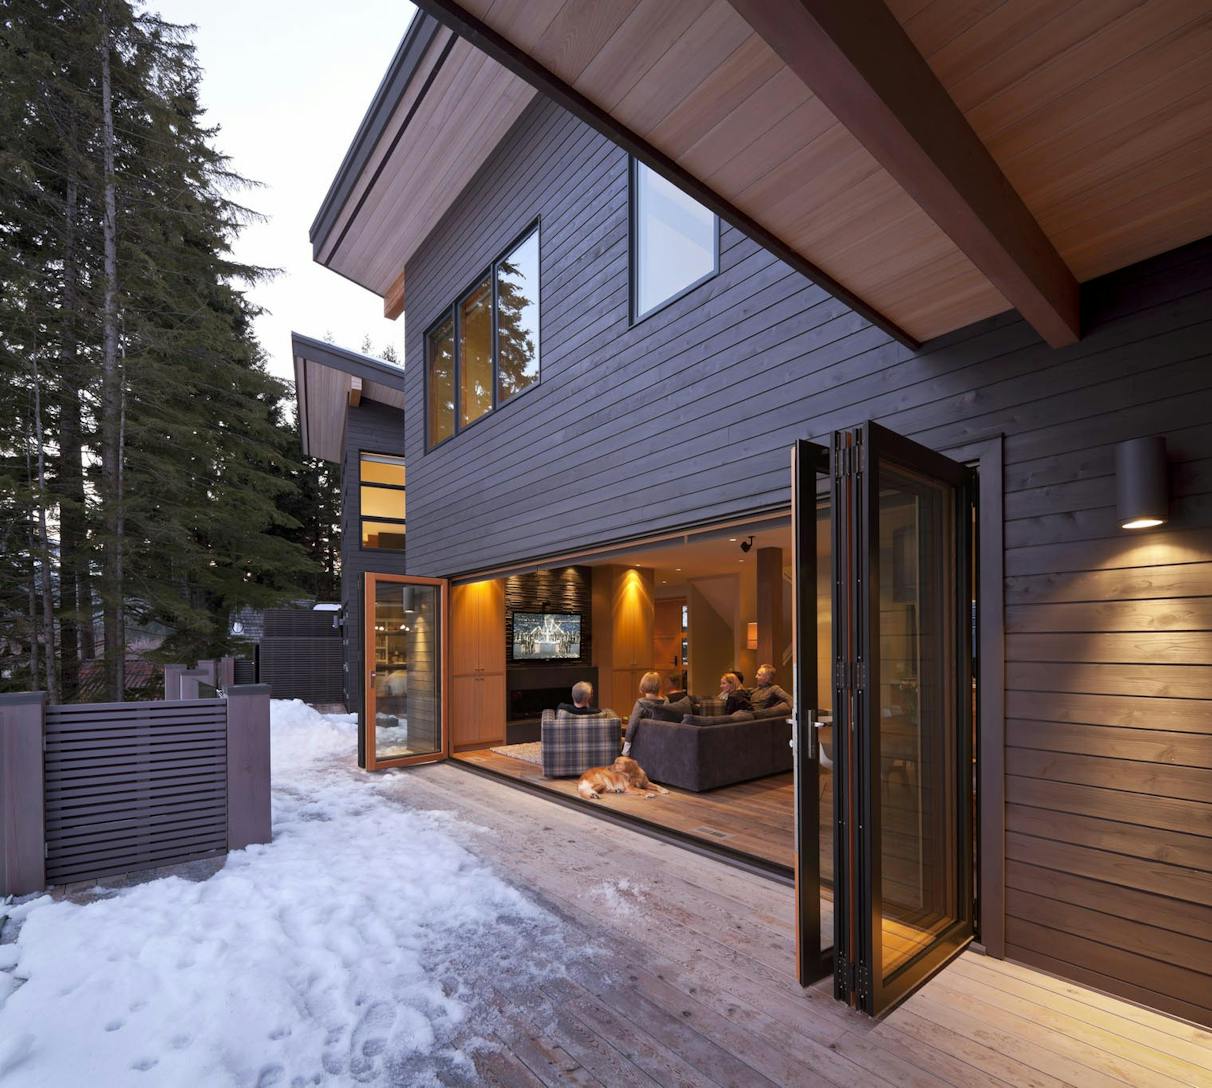 NW Clad 740 Folding patio doors performing on snow - closed exterior